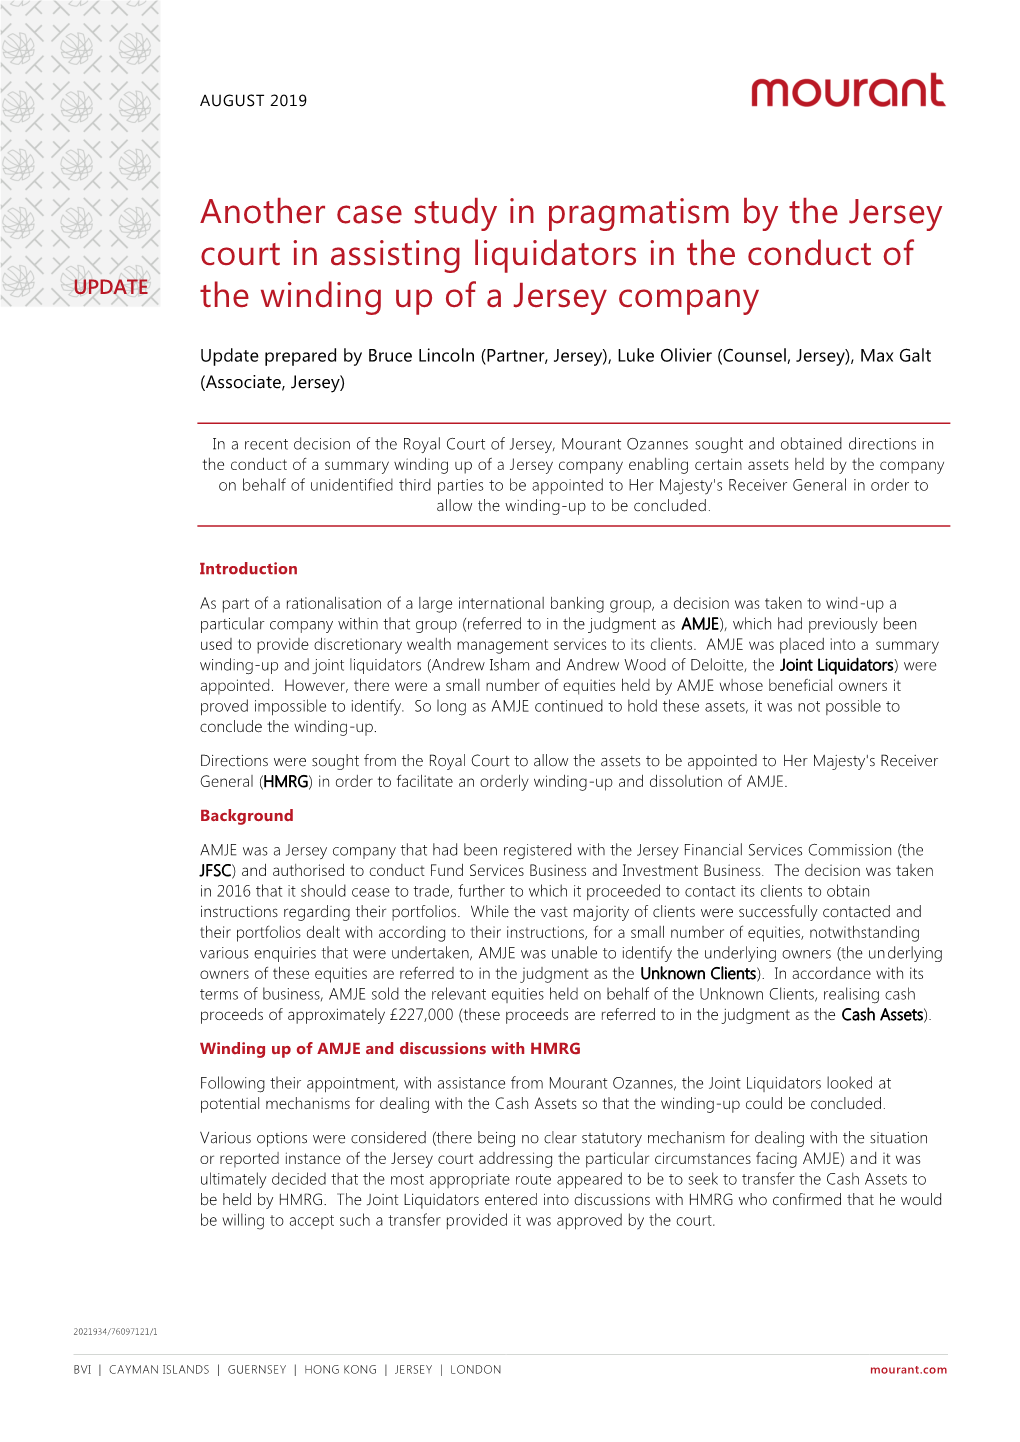 Another Case Study in Pragmatism by the Jersey Court in Assisting Liquidators in the Conduct of UPDATE the Winding up of a Jersey Company